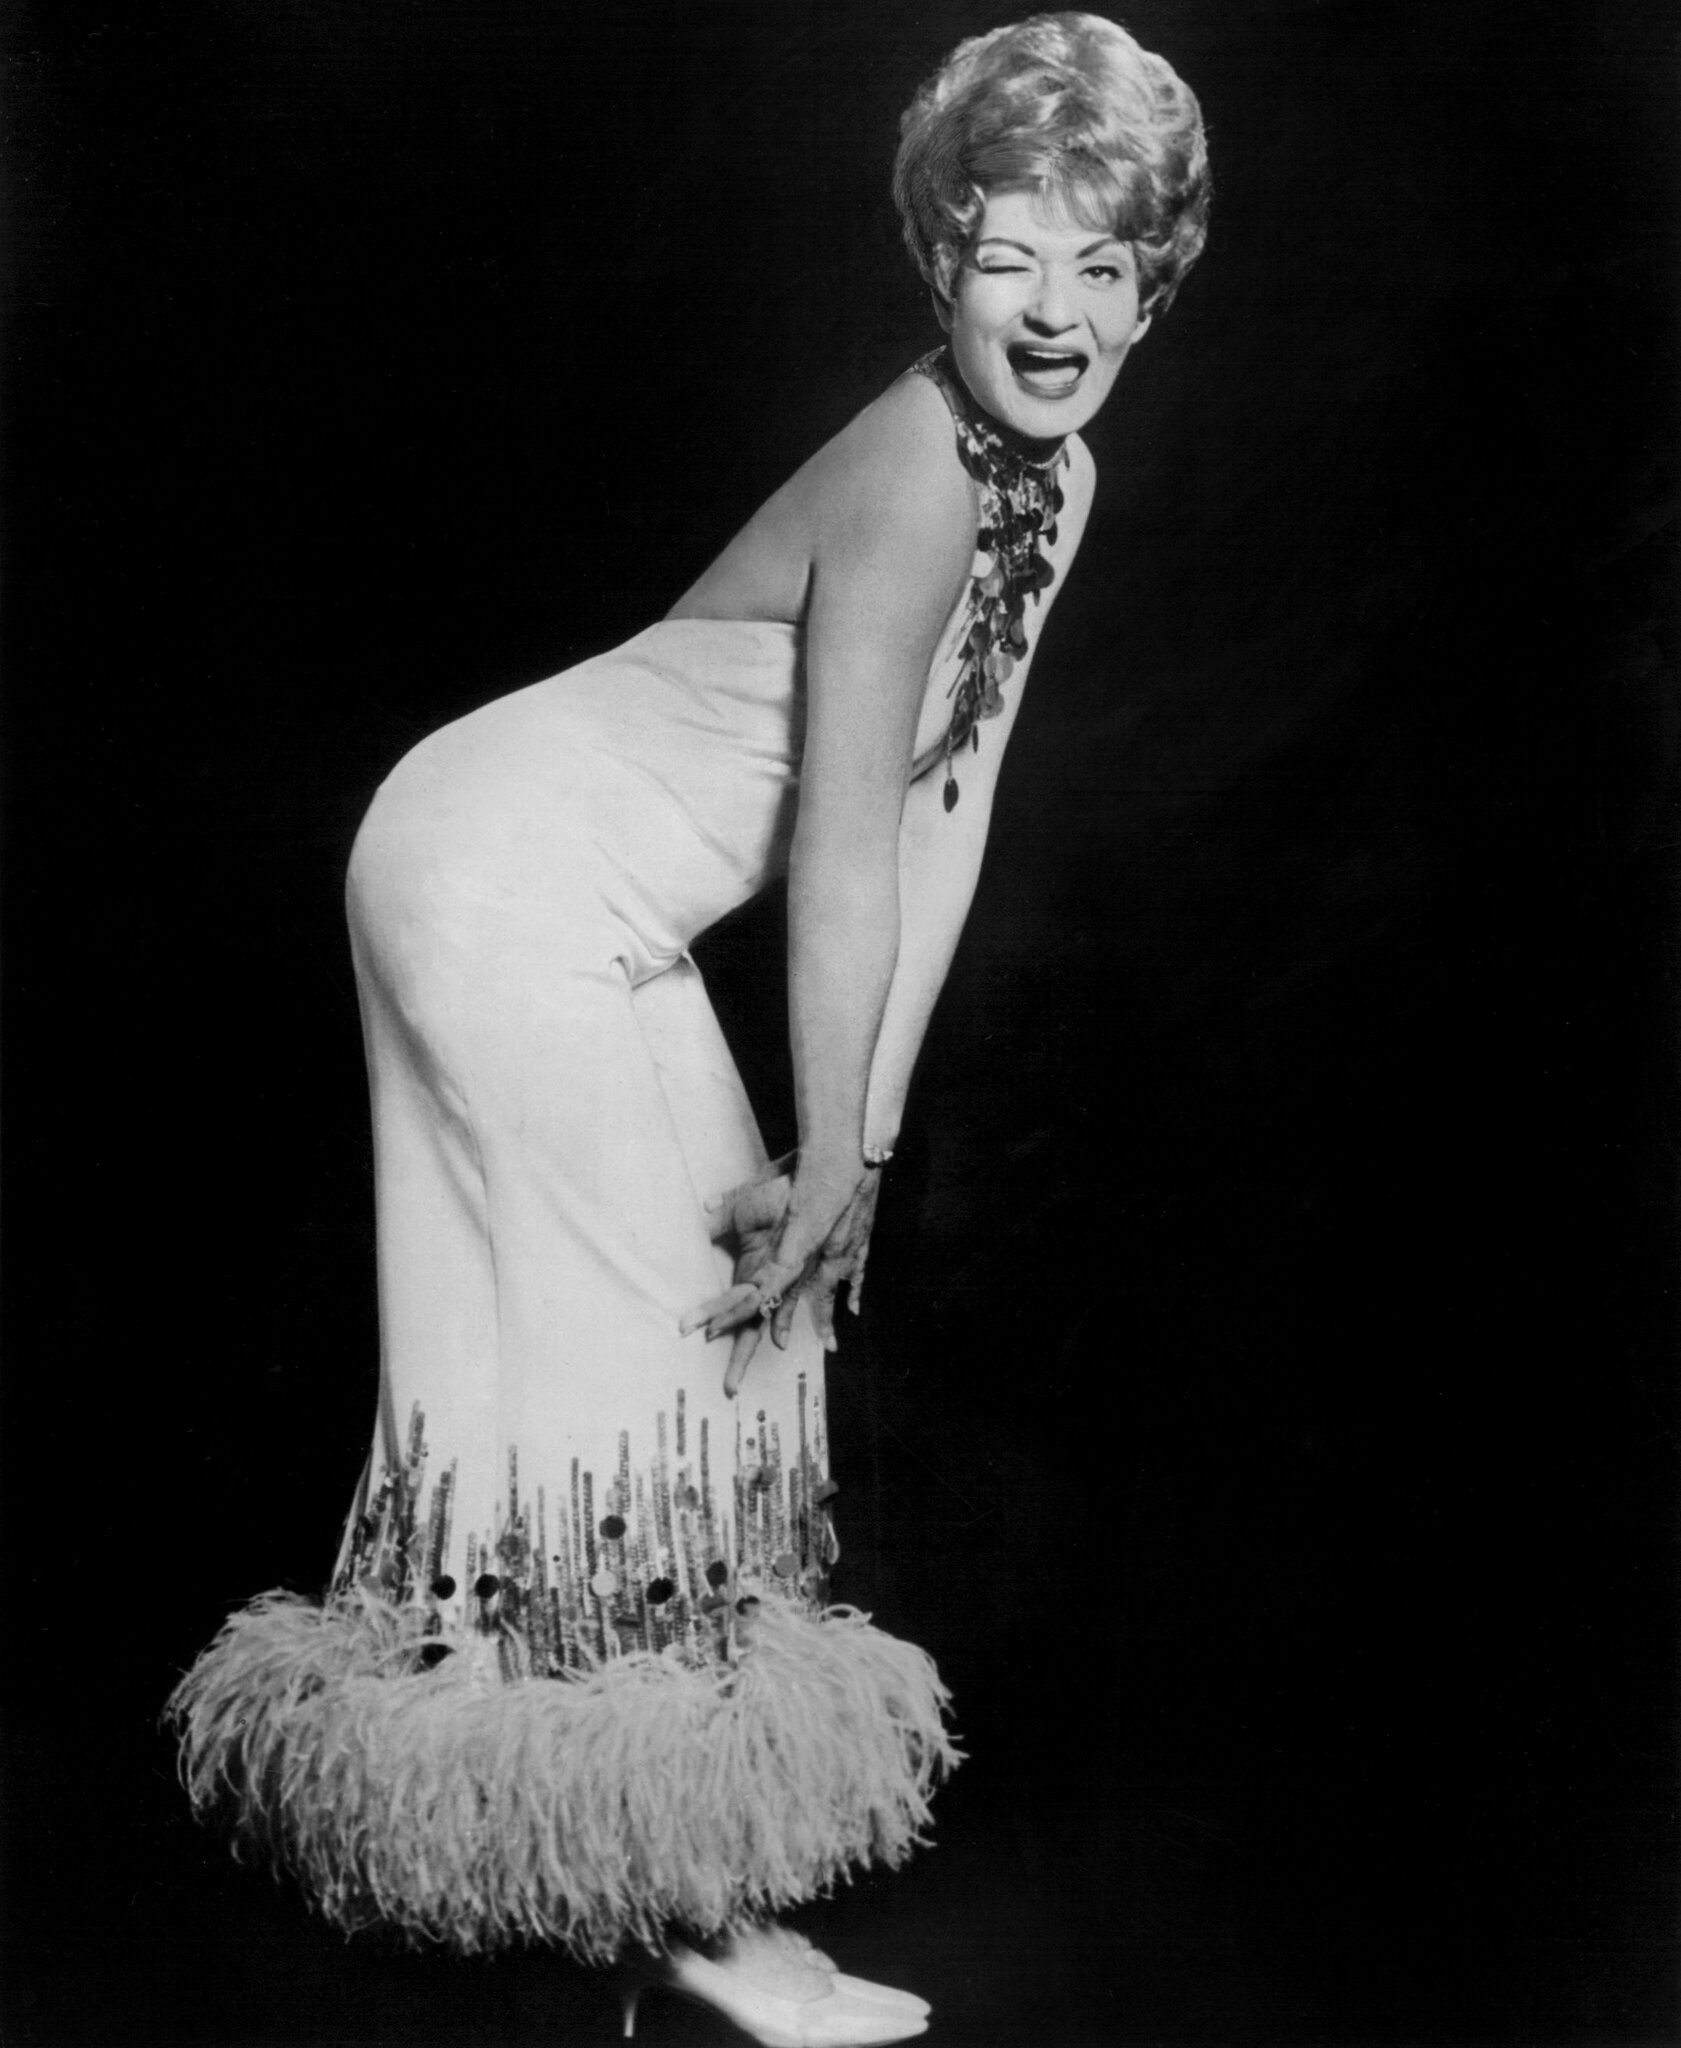 Black and white photo of Rusty Warren in the 1960s. She is bending forward with her hands on her knees, wearing a glamorous dress and winking.